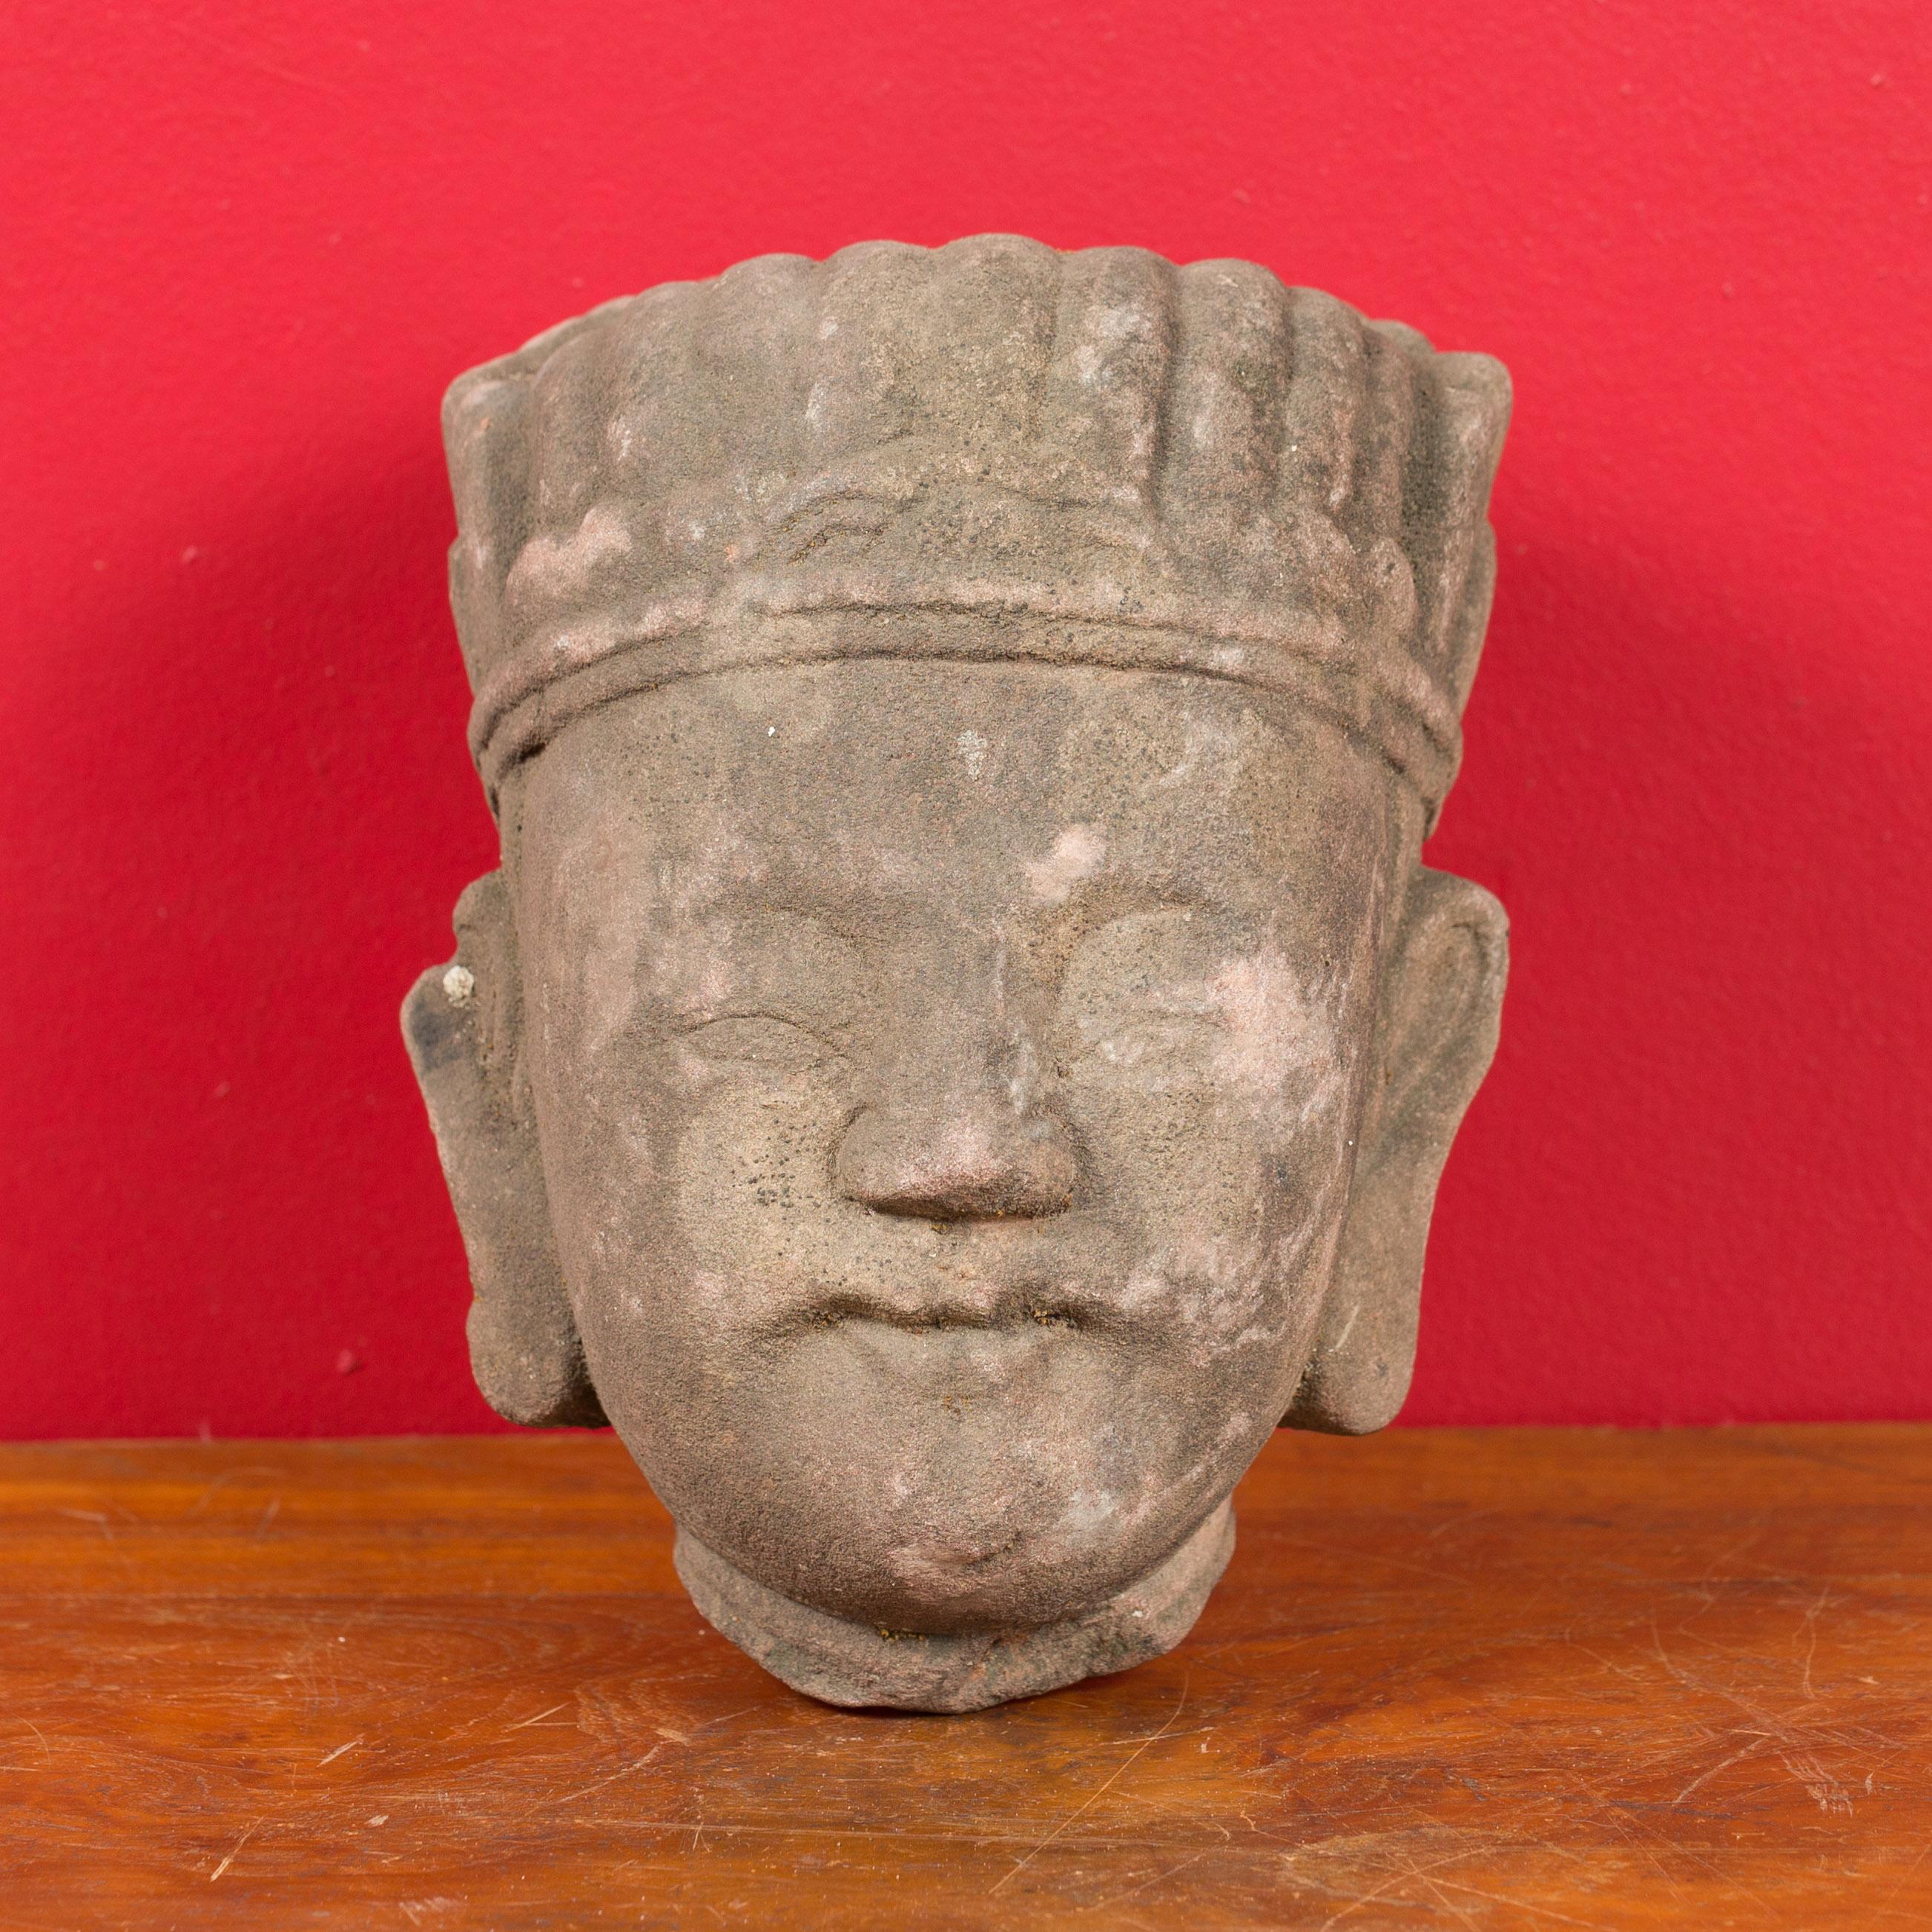 A Chinese Qing dynasty period carved head sculpture from the 19th century, with headdress. Carved in China during the Qing dynasty, this sculpture depicts the head of an official topped with a headdress. Exuding an air of tranquility, this 19th